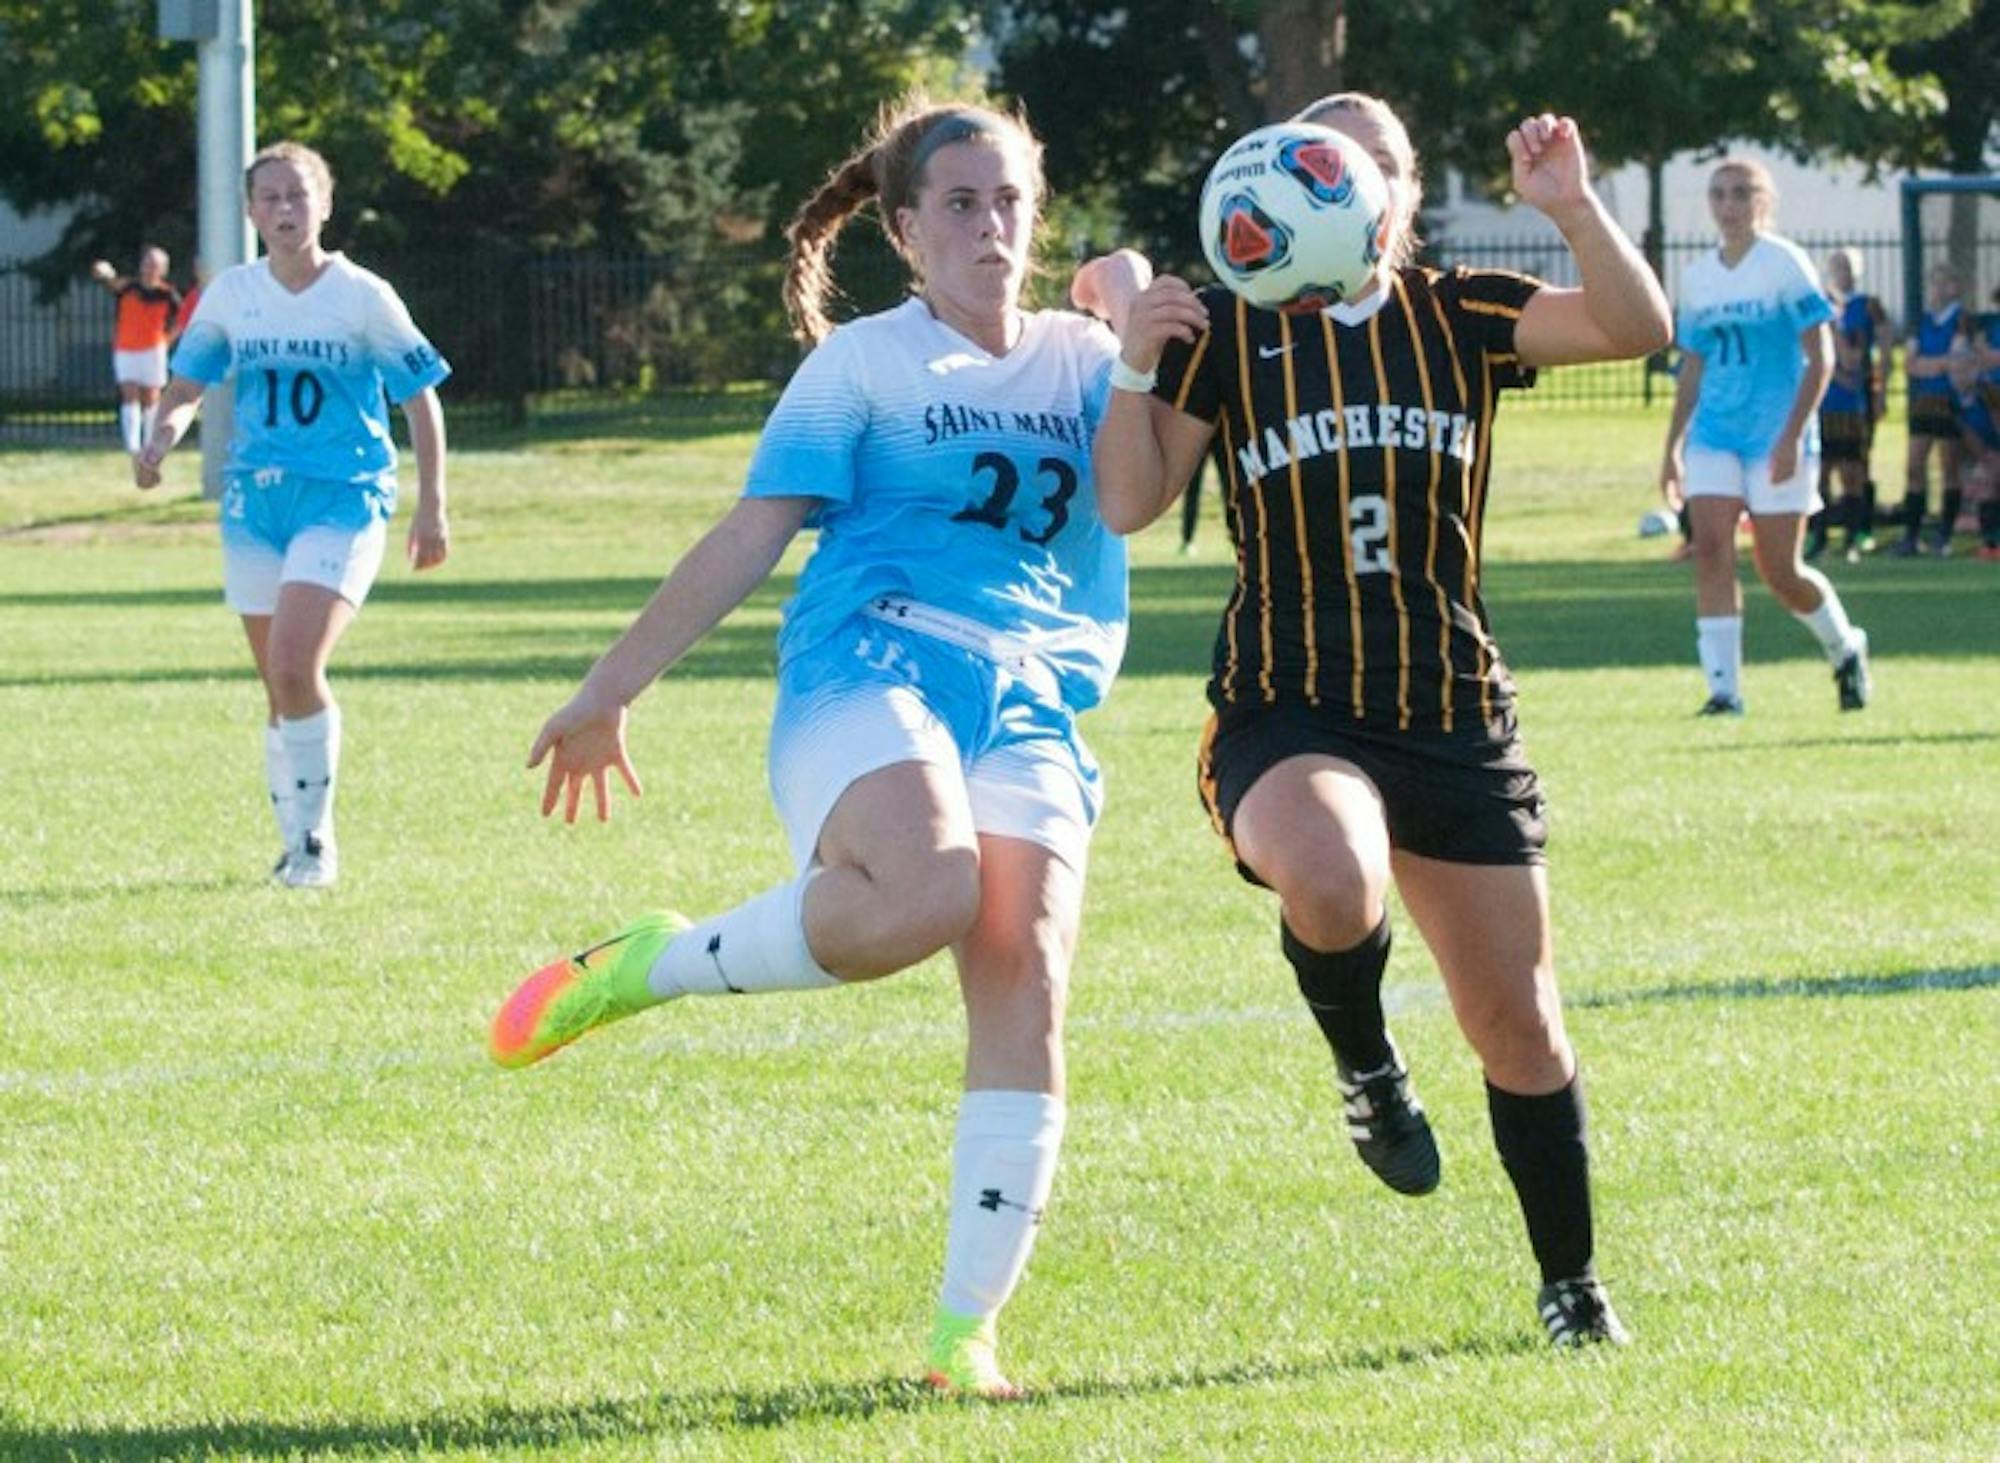 Belles freshman forward Shayleigh O’Donnell fights a defender for the ball during Saint Mary’s 4-1 win over Manchester at the Purcell Athletic Fields on Sept. 2. Saint Mary’s outshot Manchester 13-7 and held a 7-1 advantage in corner kicks.